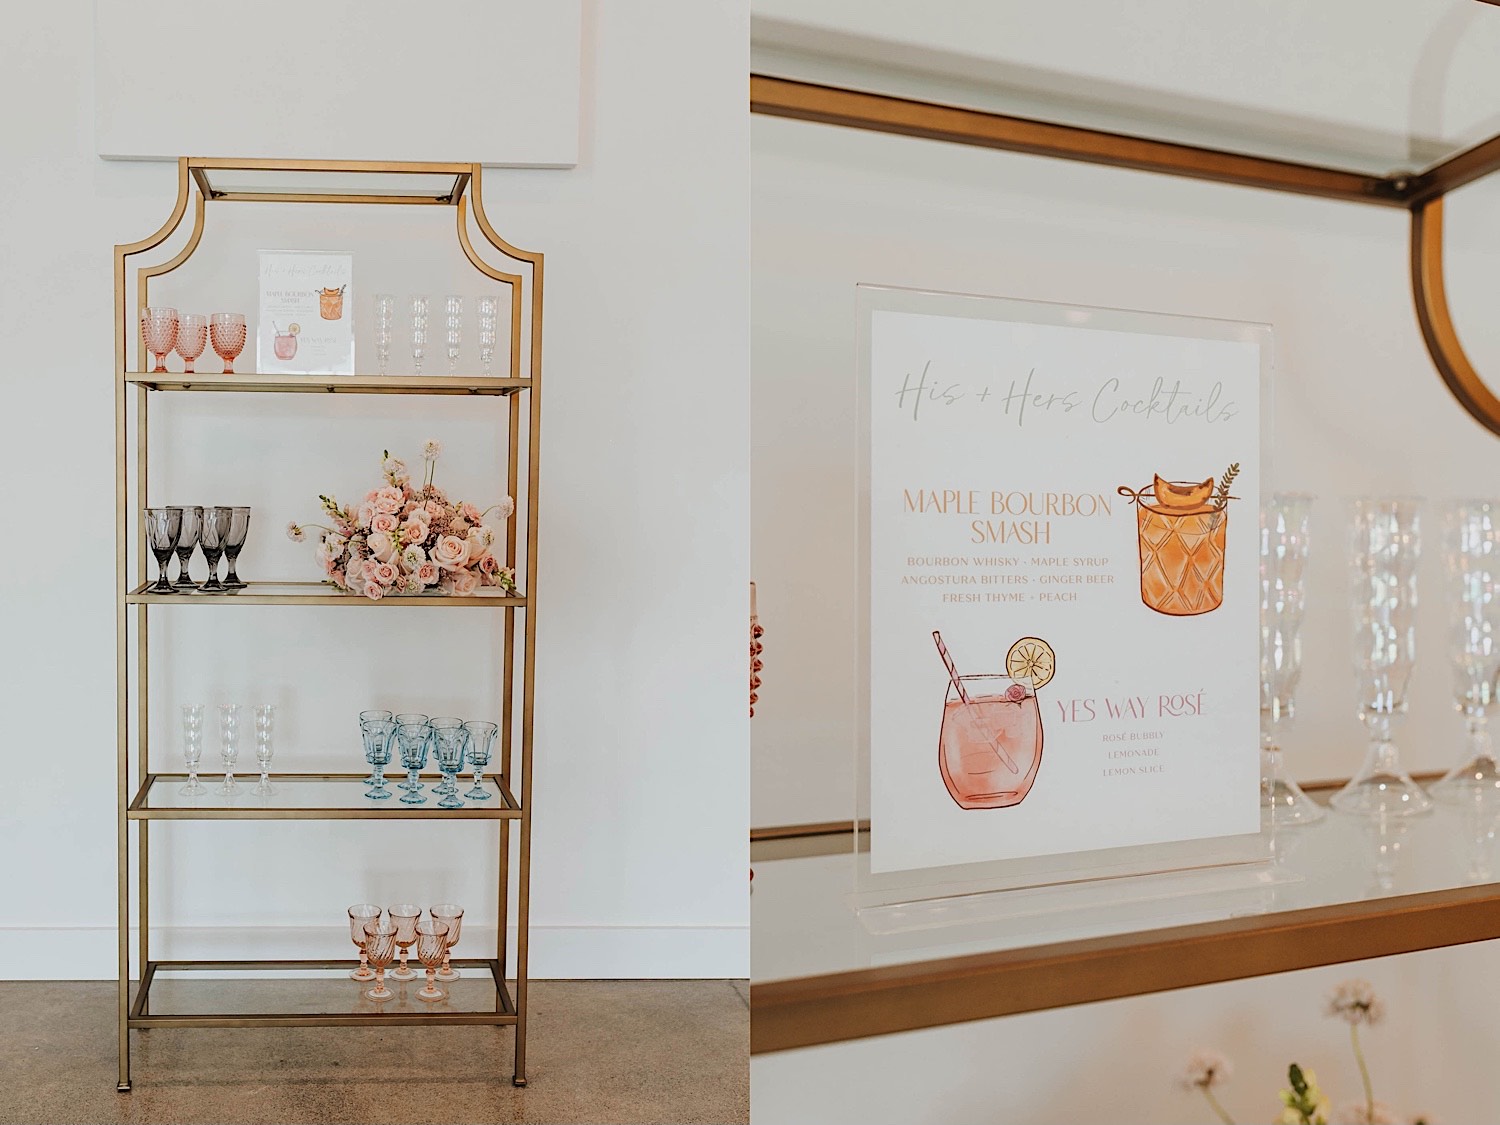 2 photos side by side, the left is of a shelf with colored glassware on it, the right is a close up photo of the signature drink menu resting on the shelf